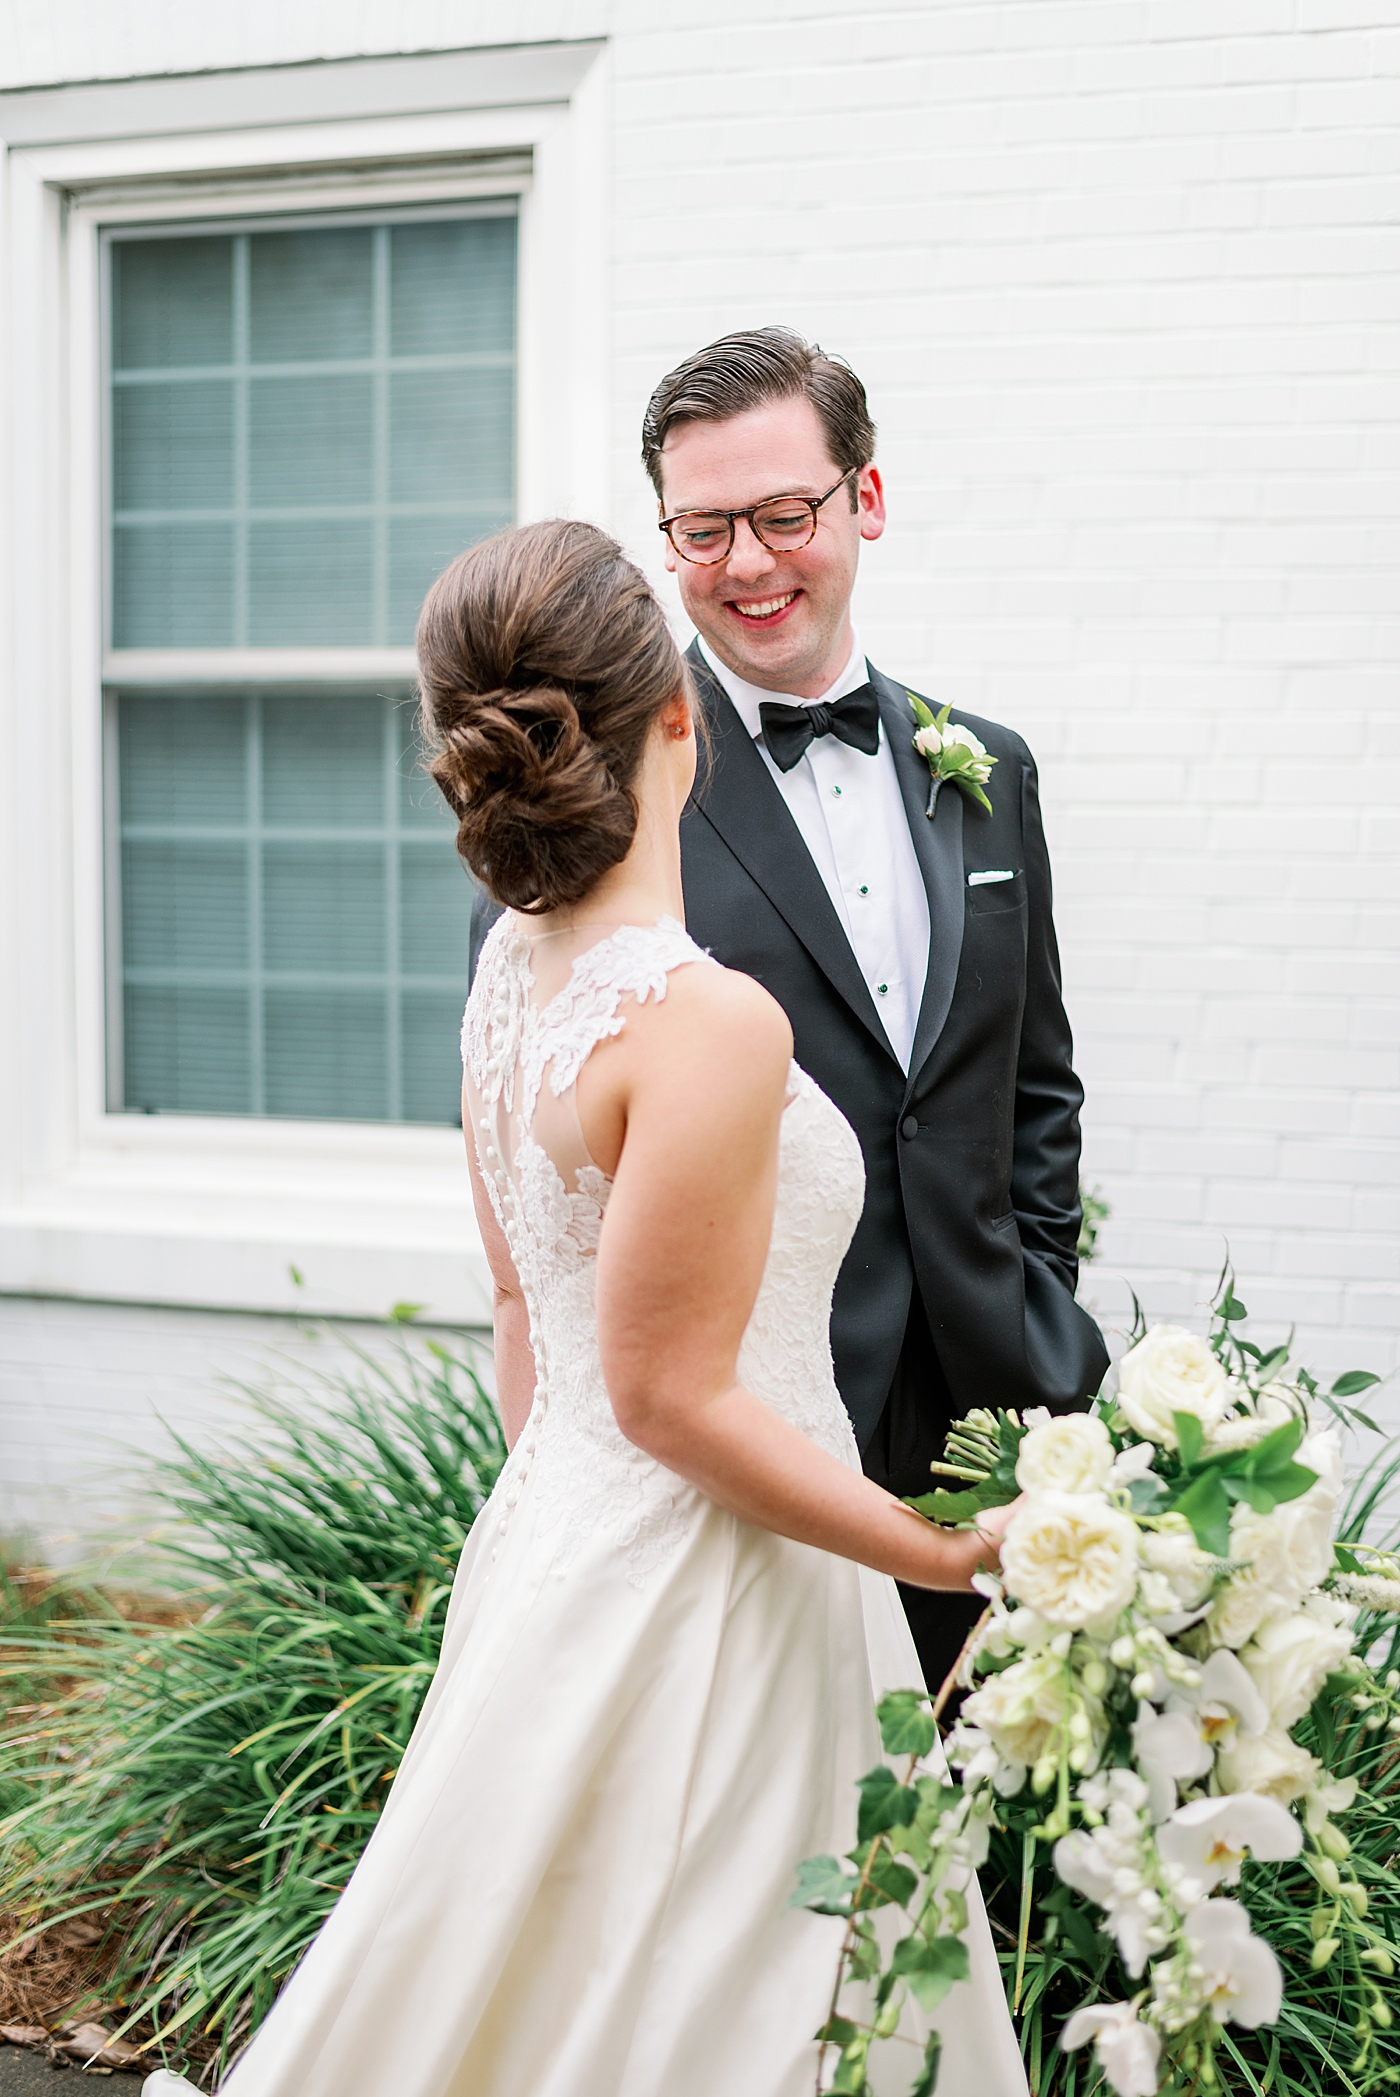 Groom smiling at his bride during their couple portraits | Photo by Annie Laura Photography